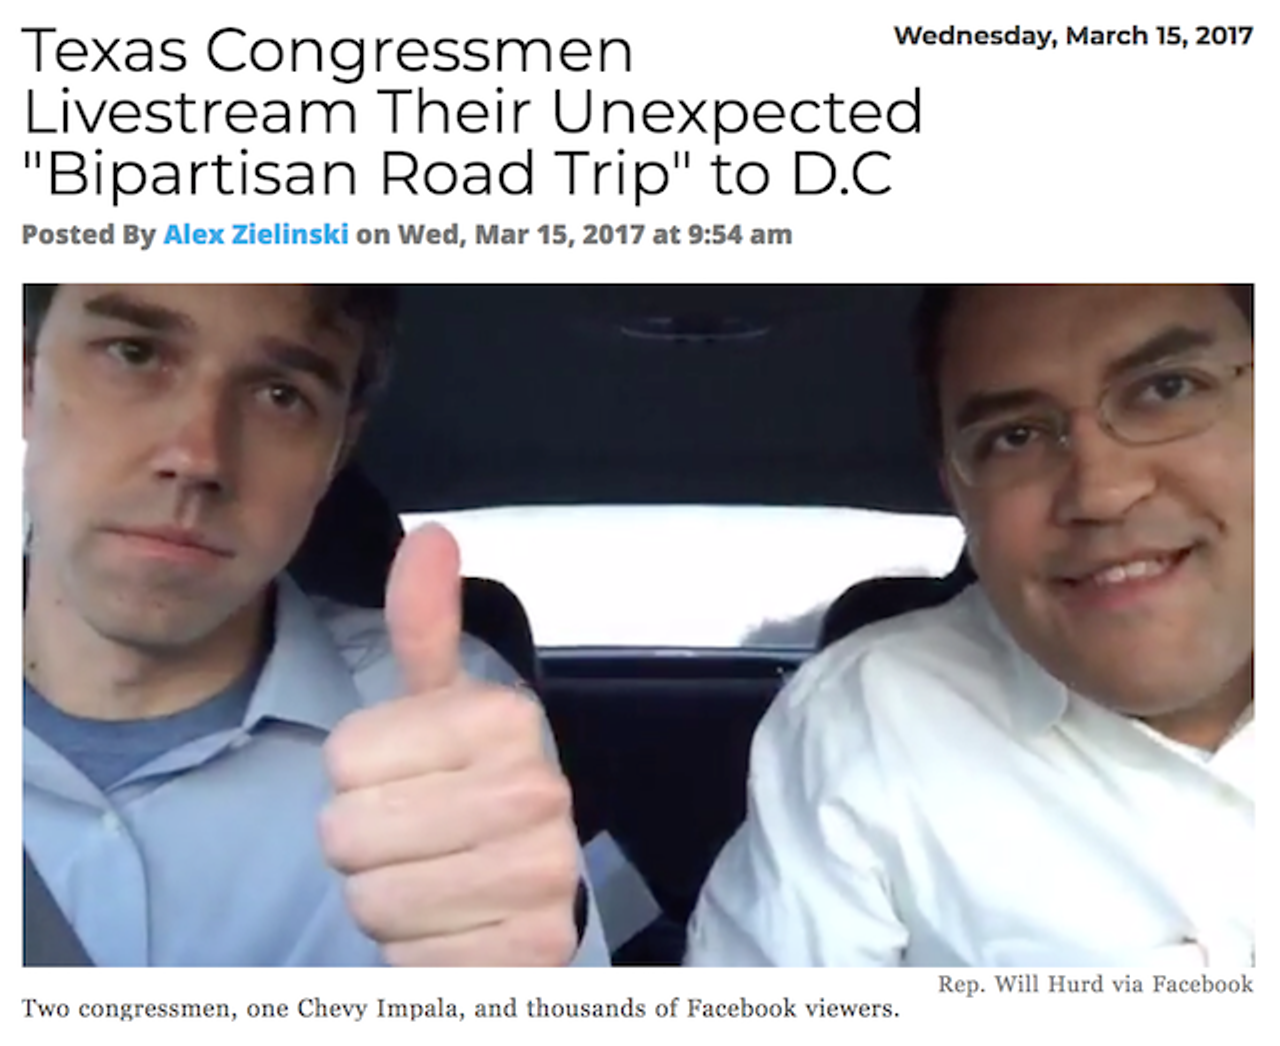 Texas Congressman Beto O'Rourke (D) and Will Hurd (R) hopped in a rental and jetted across the country together after their flight was cancelled in the hellacious snow storms that happened earlier this year. Read more.